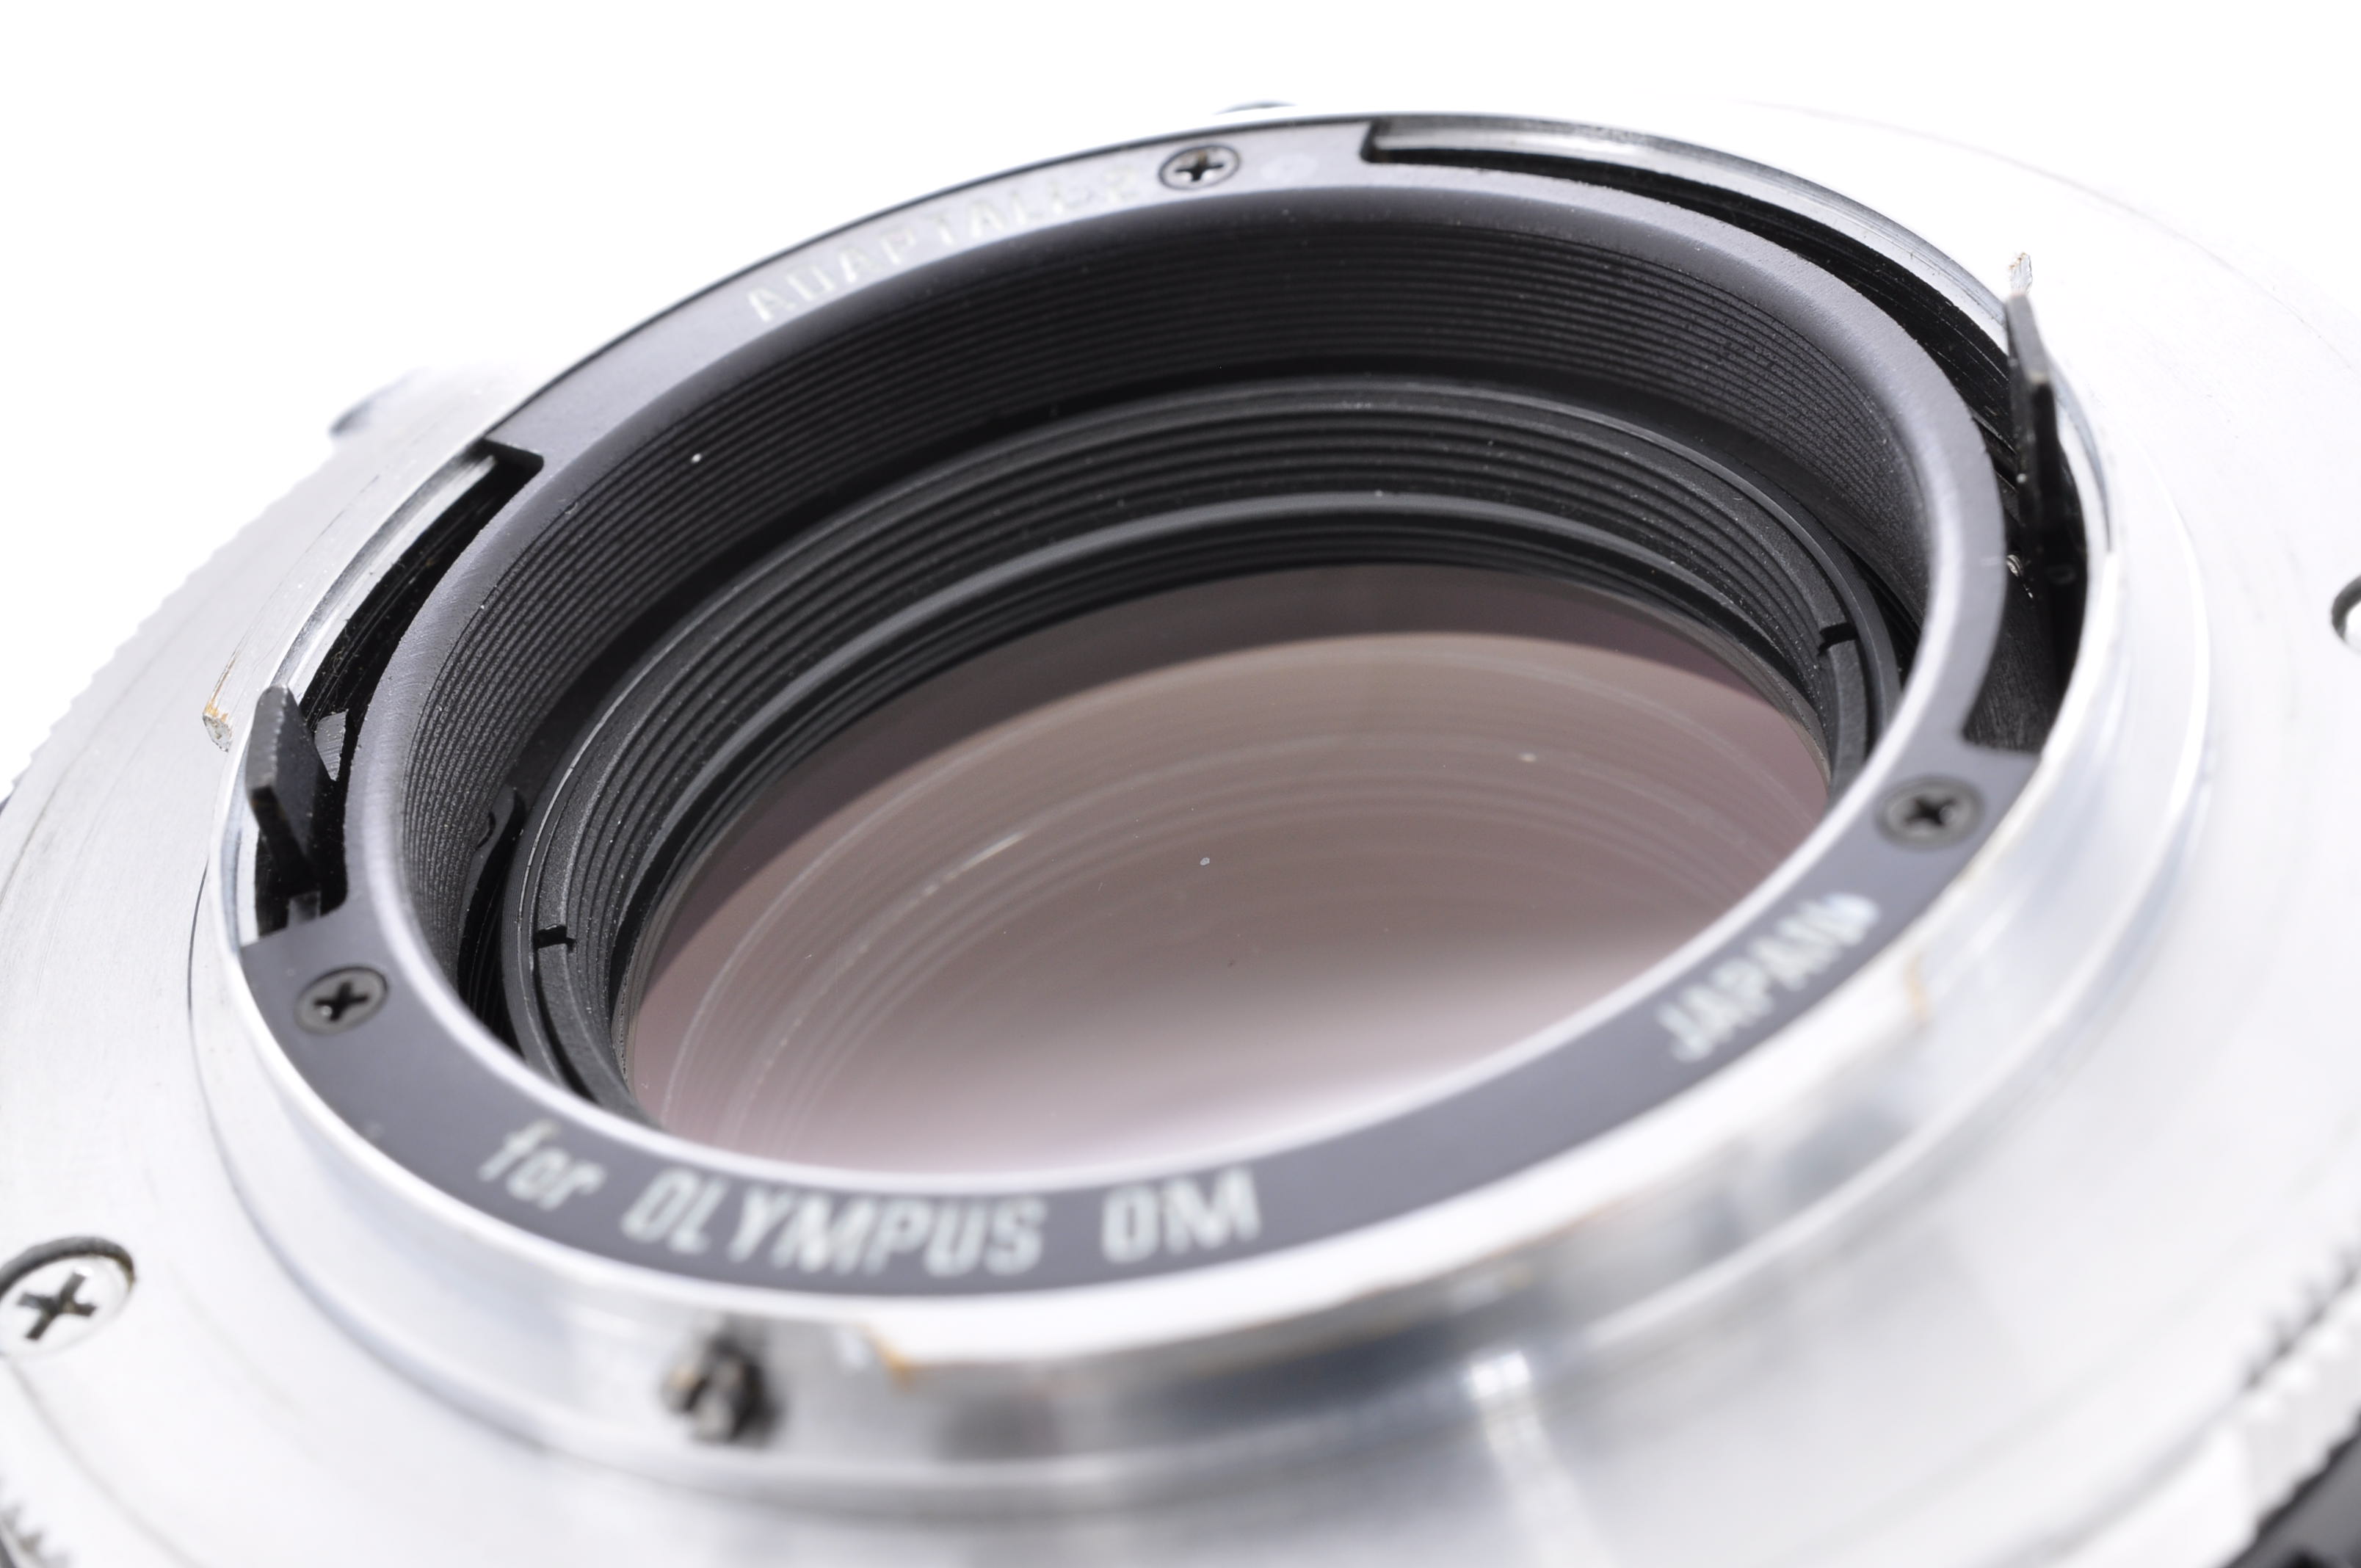 Tamron SP 90mm F/2.5 MF Macro Lens For Olympus OM Mount [Near Mint-] From Japan img10